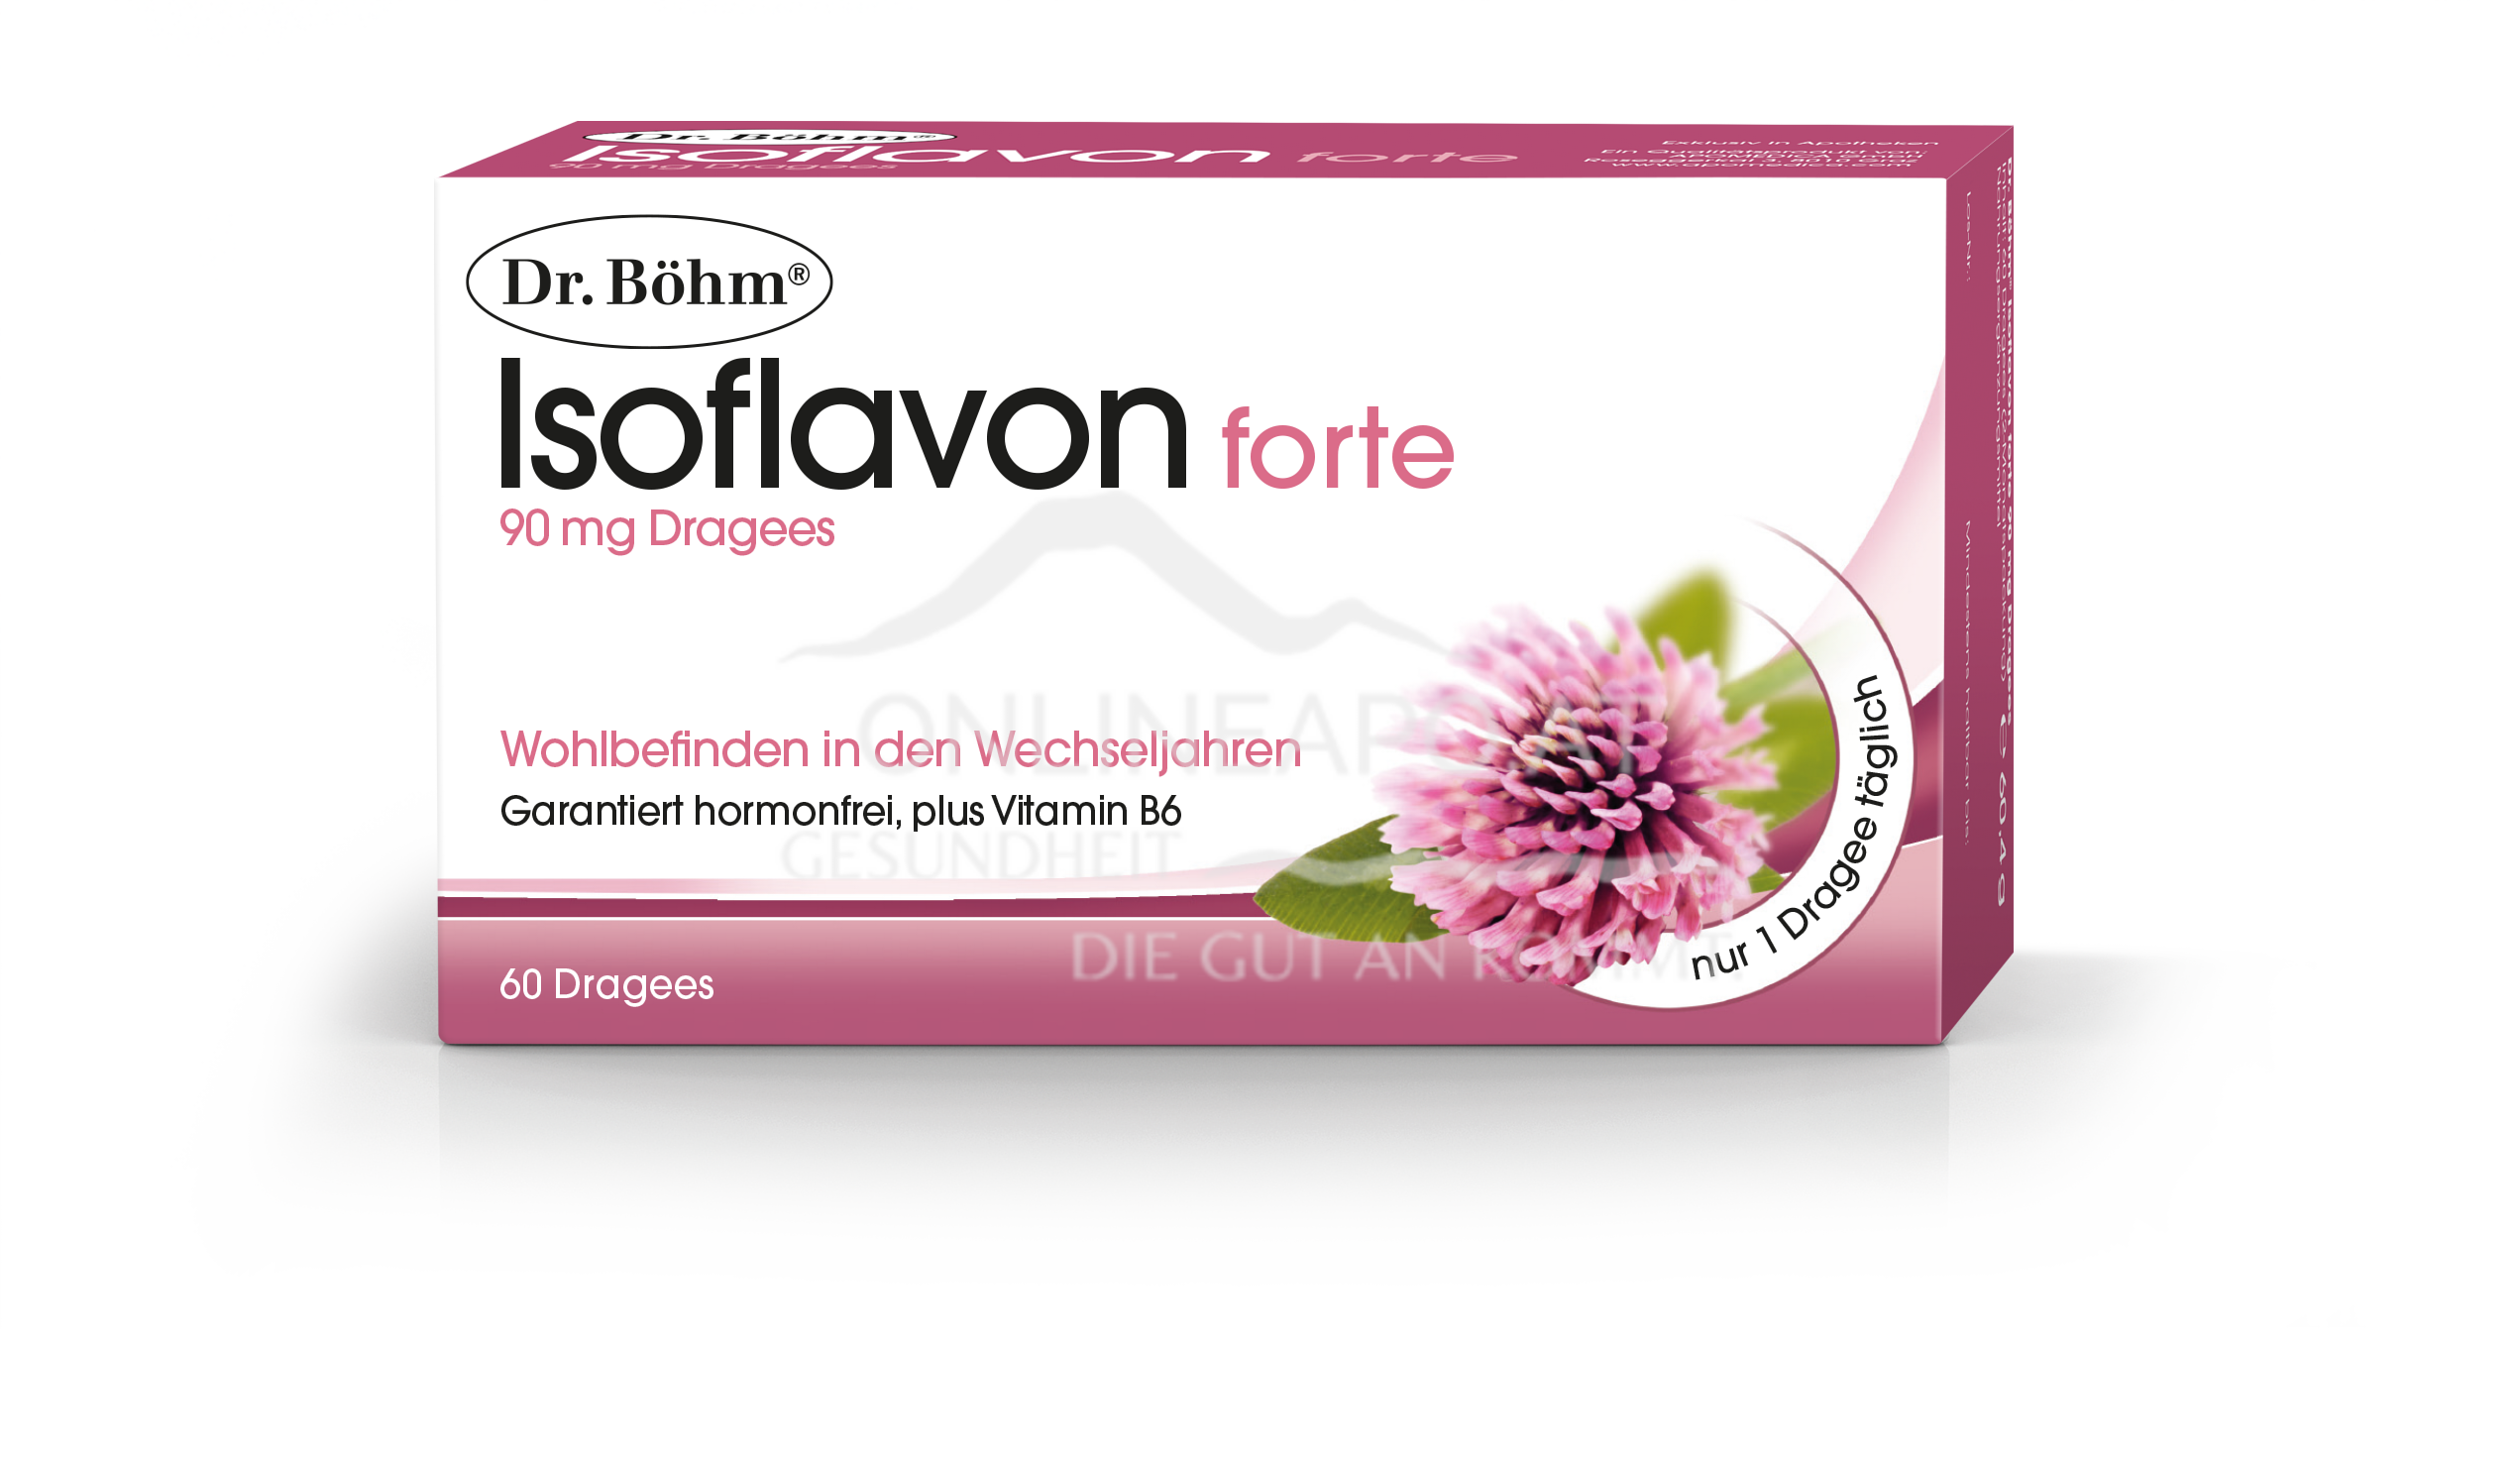 Dr. Böhm® Isoflavon forte 90mg Dragees